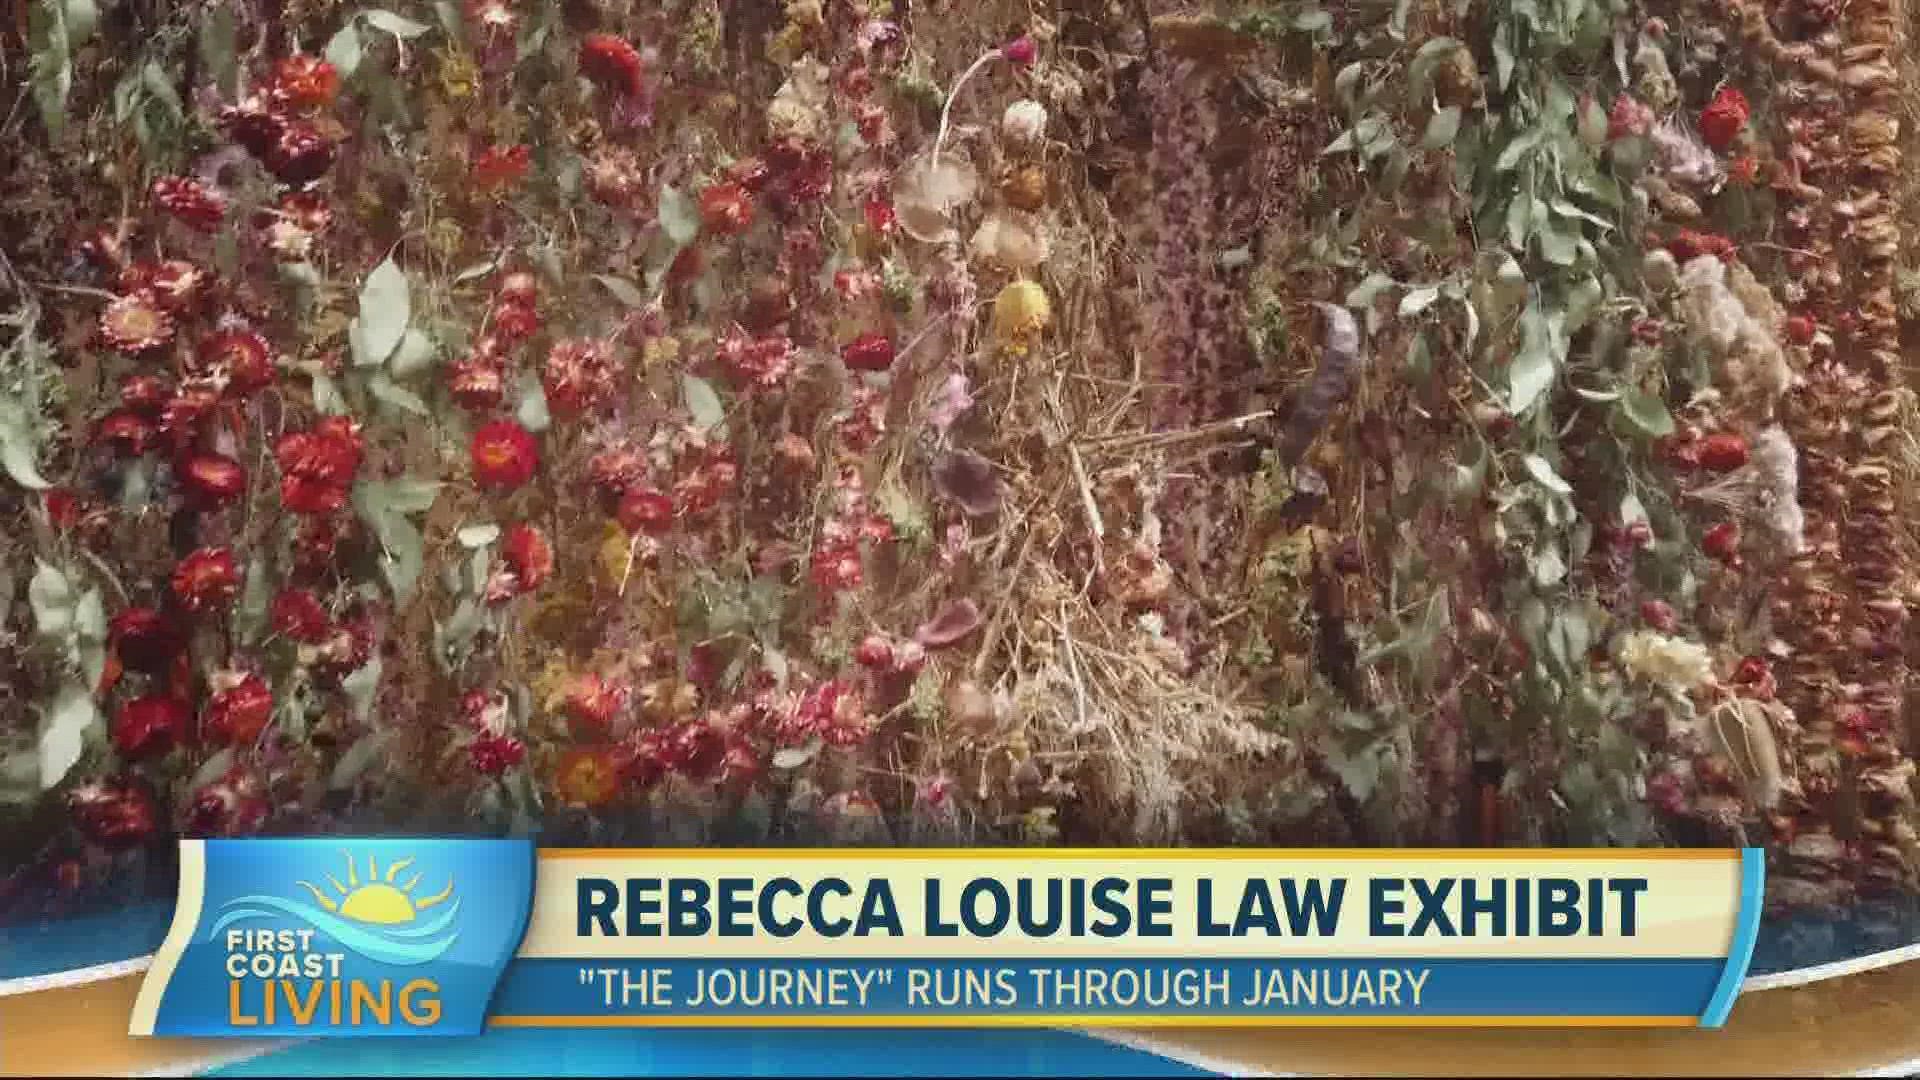 Rebecca Louise Law shows off the beauty of nature with a 16 foot wall of flowers that makes a tunnel. The Journey runs through January.